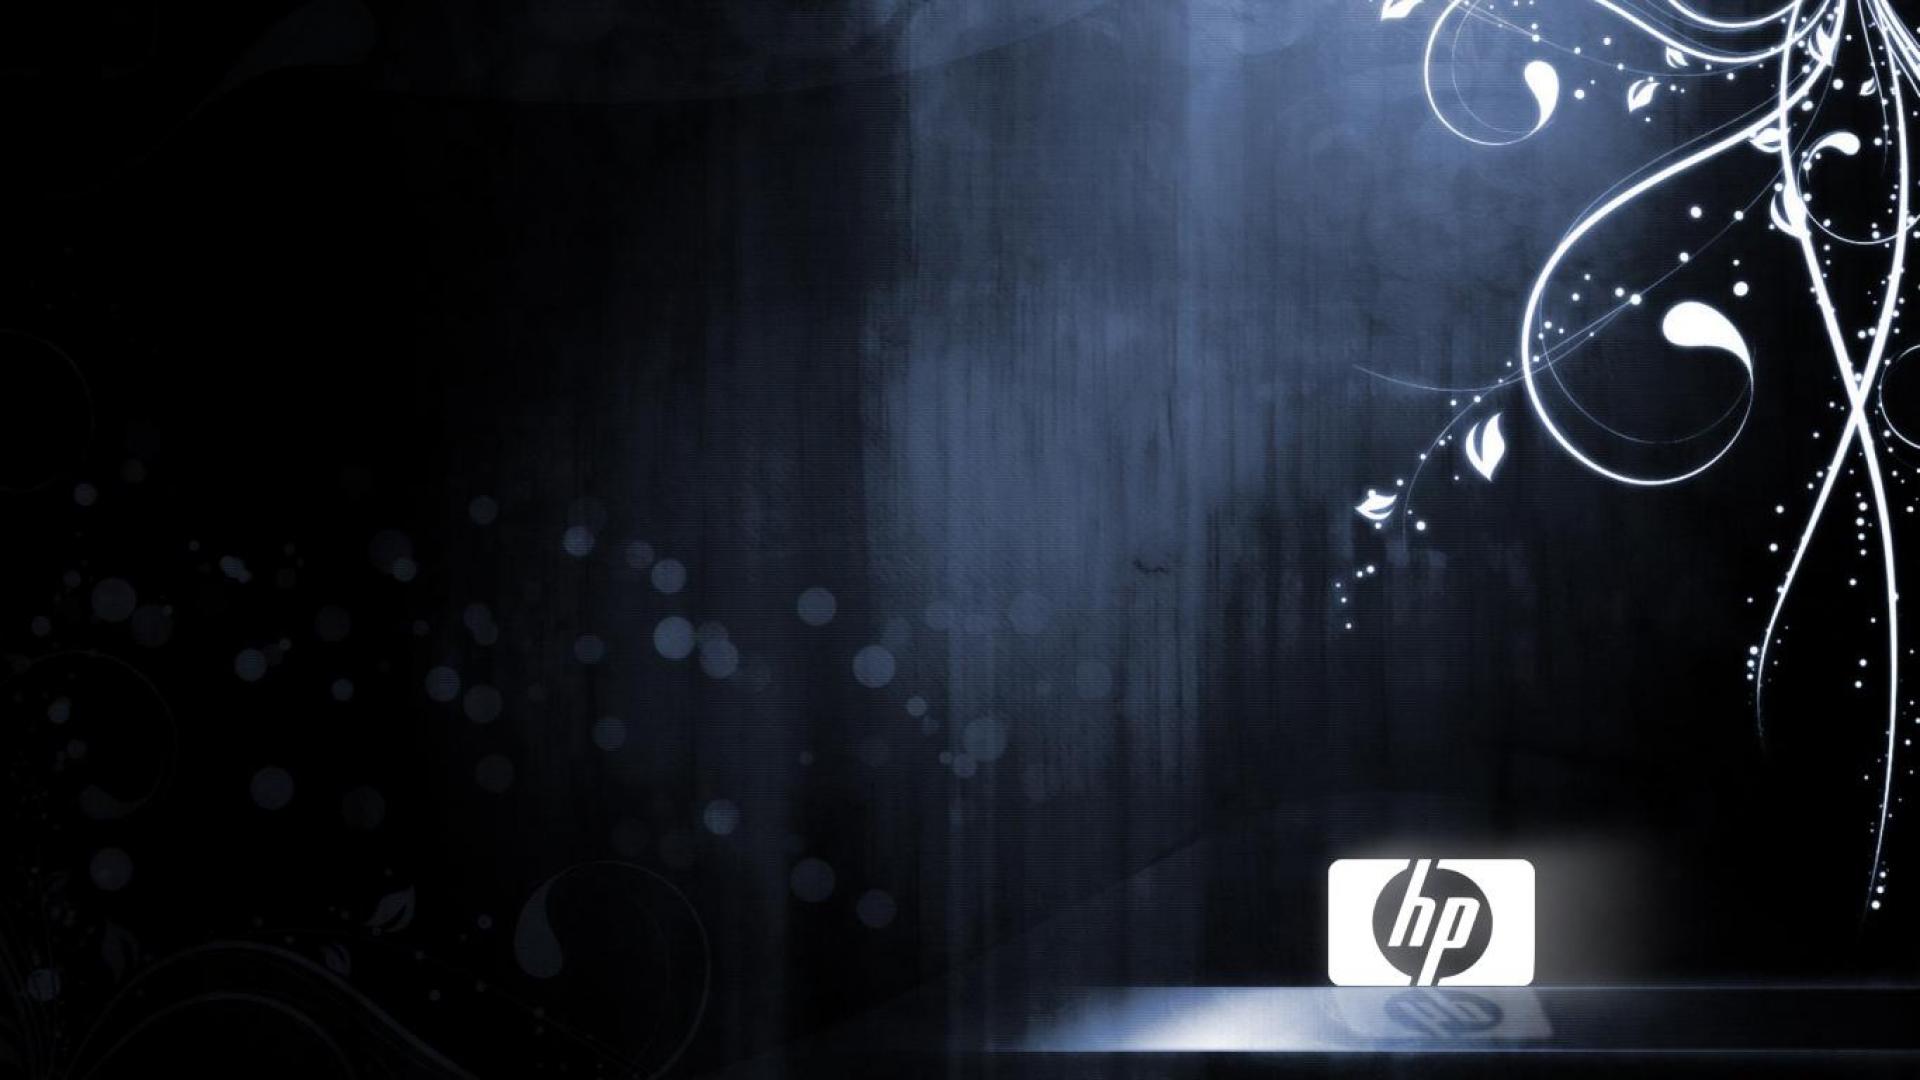 Hp   86967   High Quality and Resolution Wallpapers on hqwallbase 1920x1080